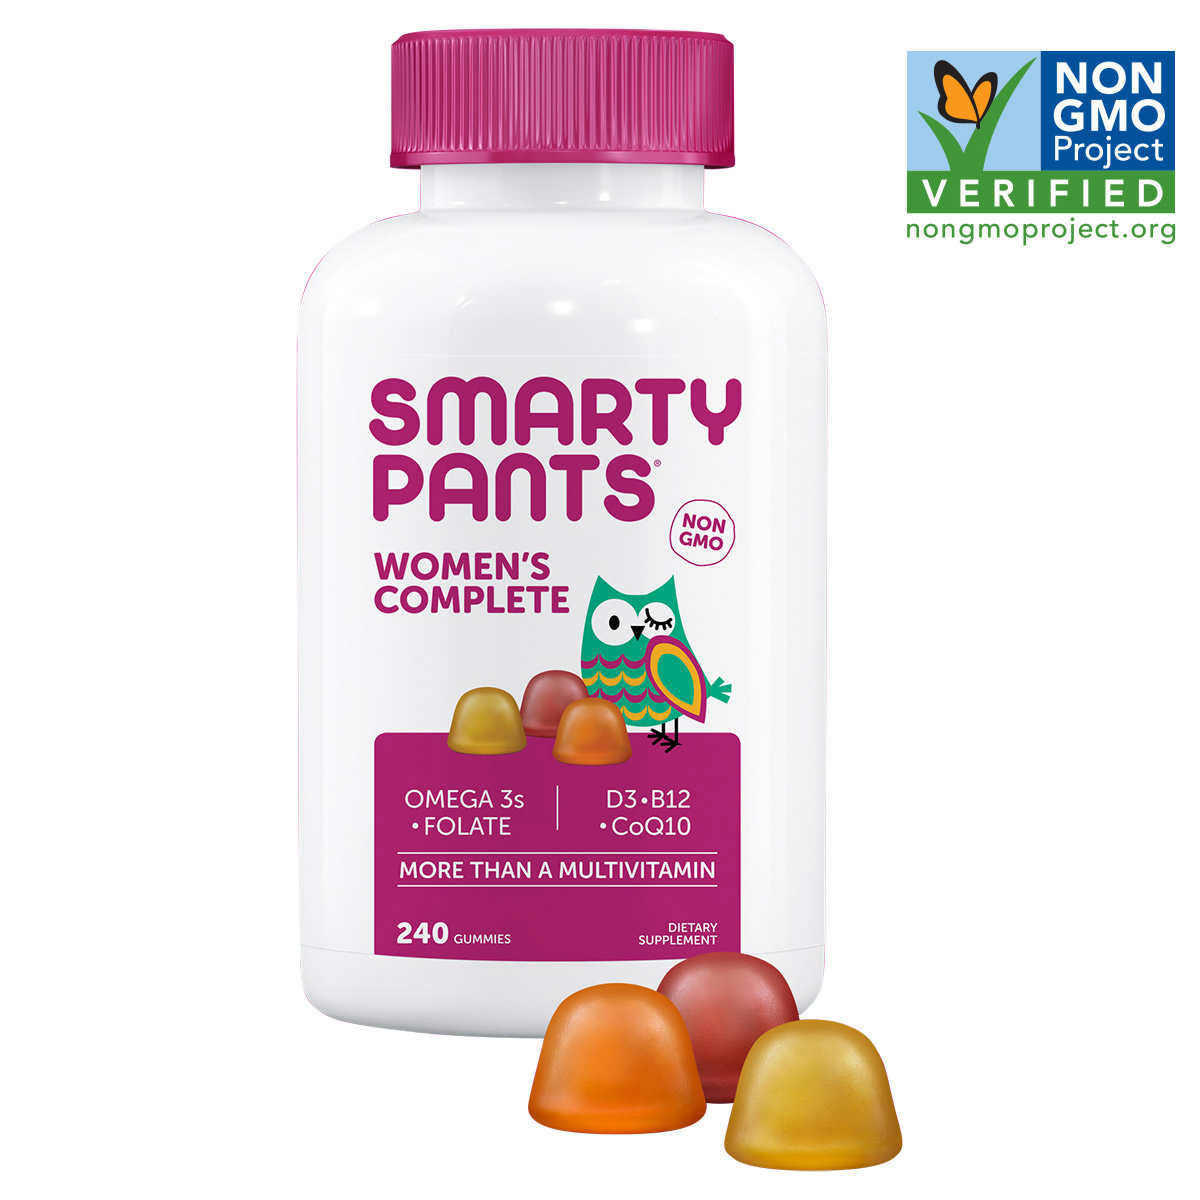 Our Point of View on SmartyPants Organic Kids Multivitamin From Amazon   YouTube